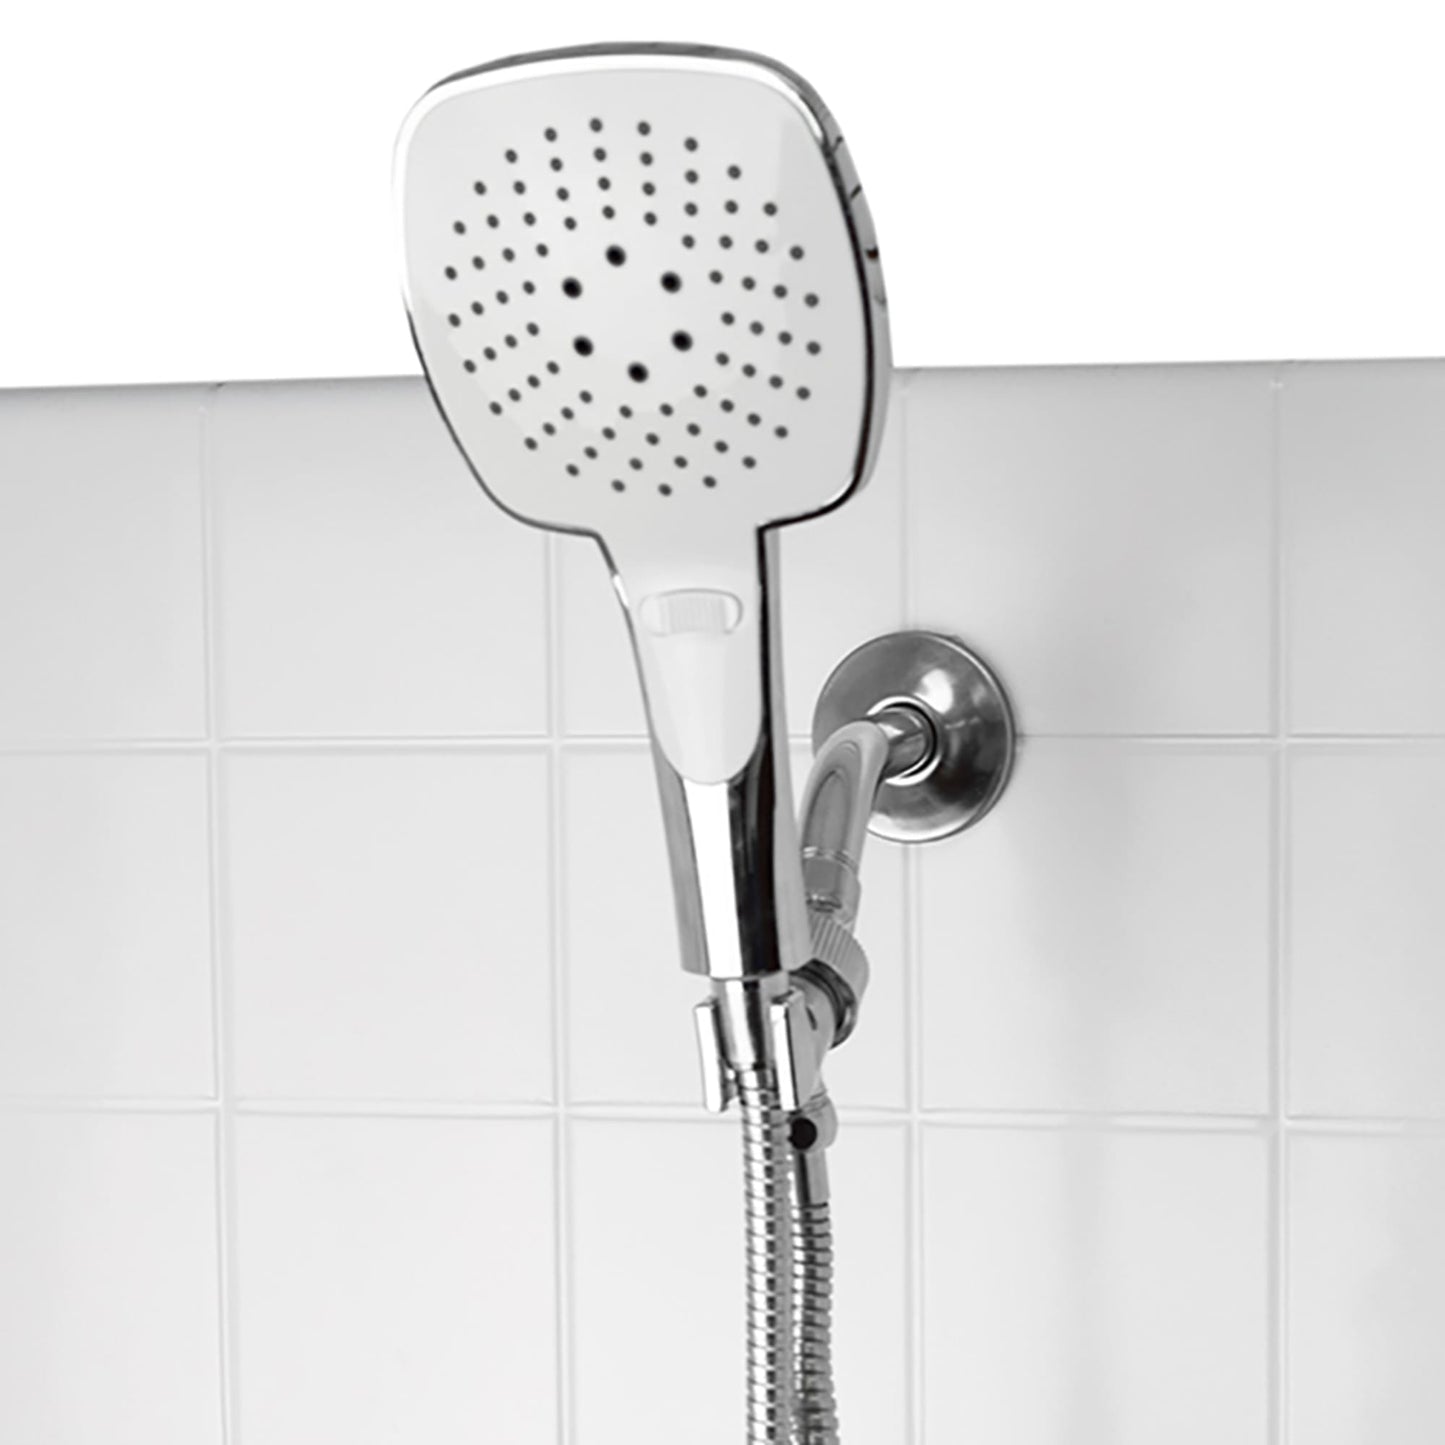 Modern Luxury  Handheld 3 Function Shower Massager with 5 FT Hose and Integrated Pause Button, Chrome